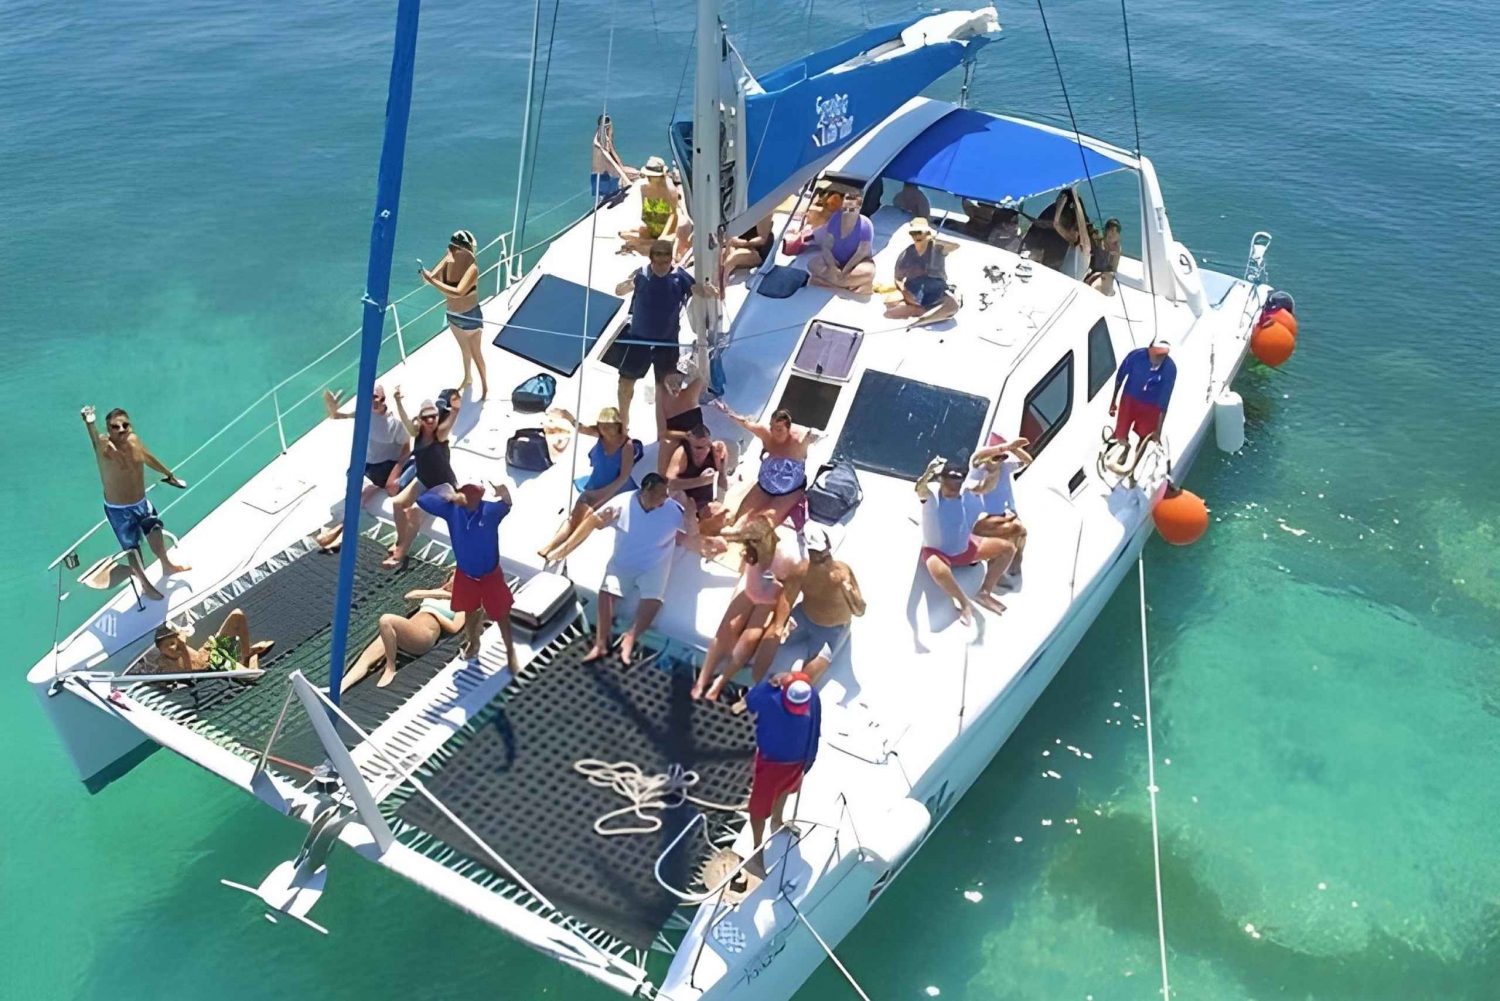 Private Party boat catamaran excursion + drinks and Barbecue